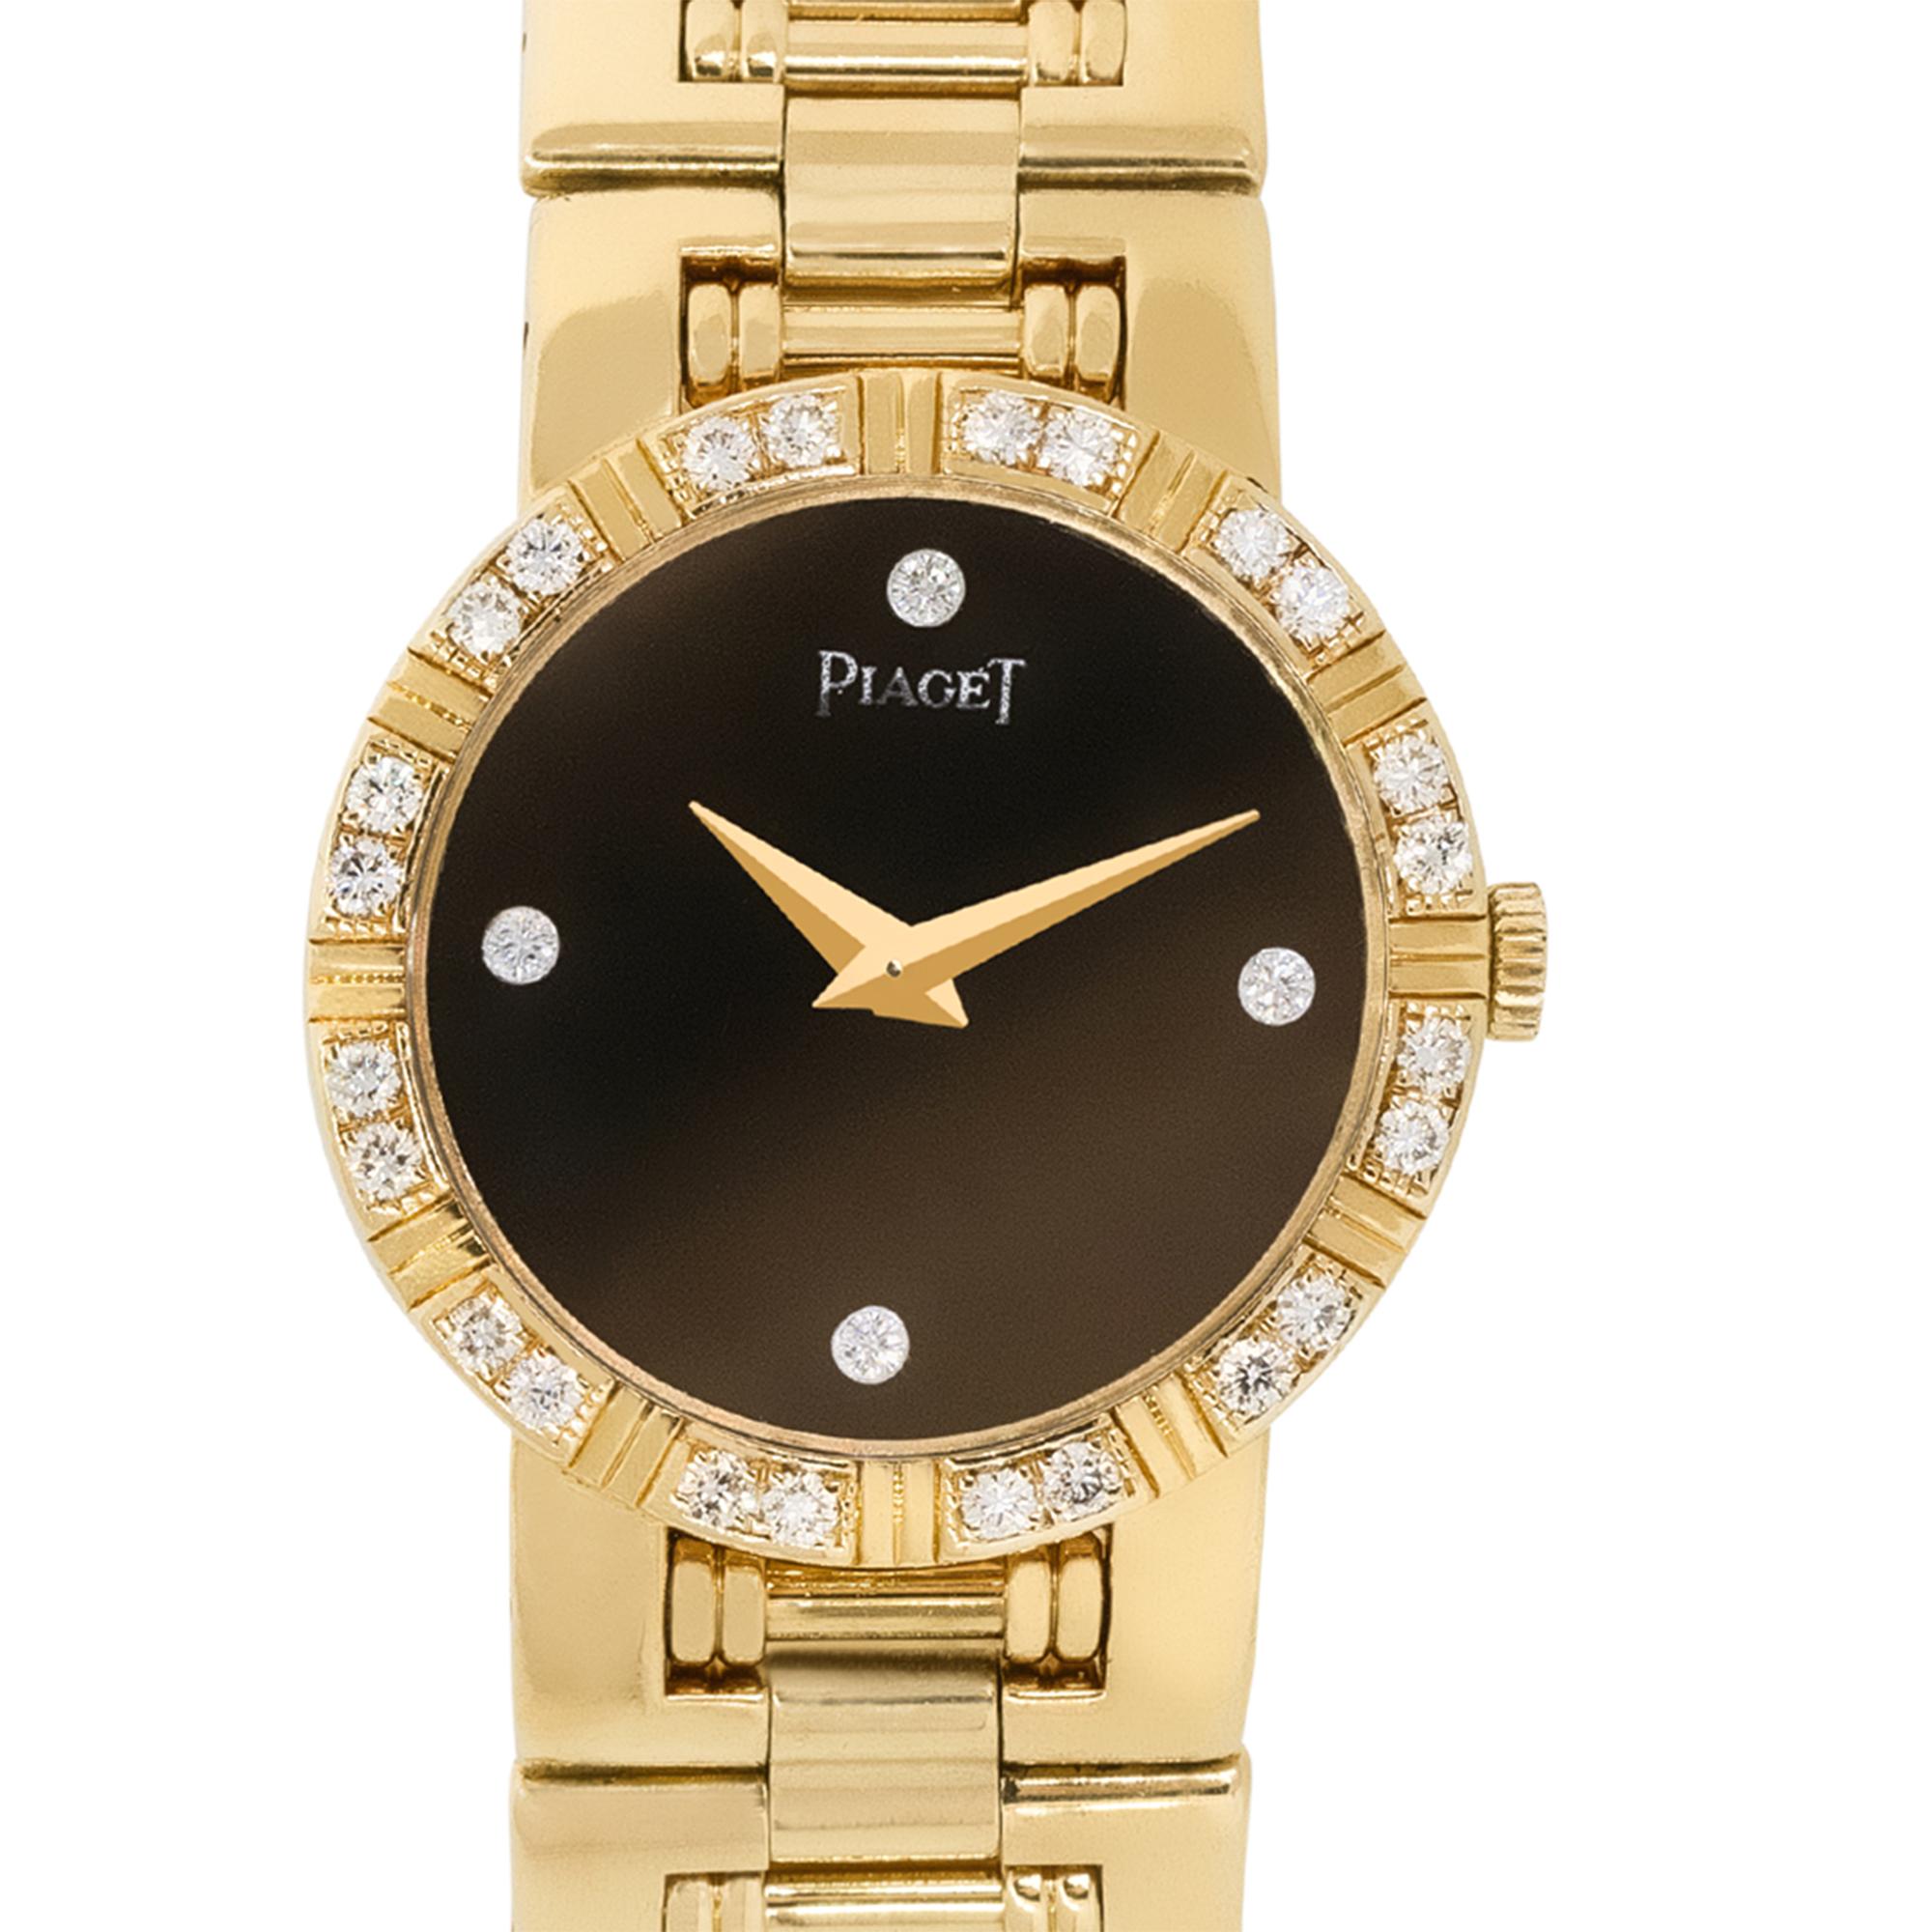 Brand: Piaget
Model: 80564 K 81
Case Material: 18k yellow gold
Case Diameter: 25mm
Crystal: Scratch resistant sapphire
Bezel: 18k yellow gold bezel with Diamonds
Dial: Black dial with gold roman numerals and hands as well as Diamond hour